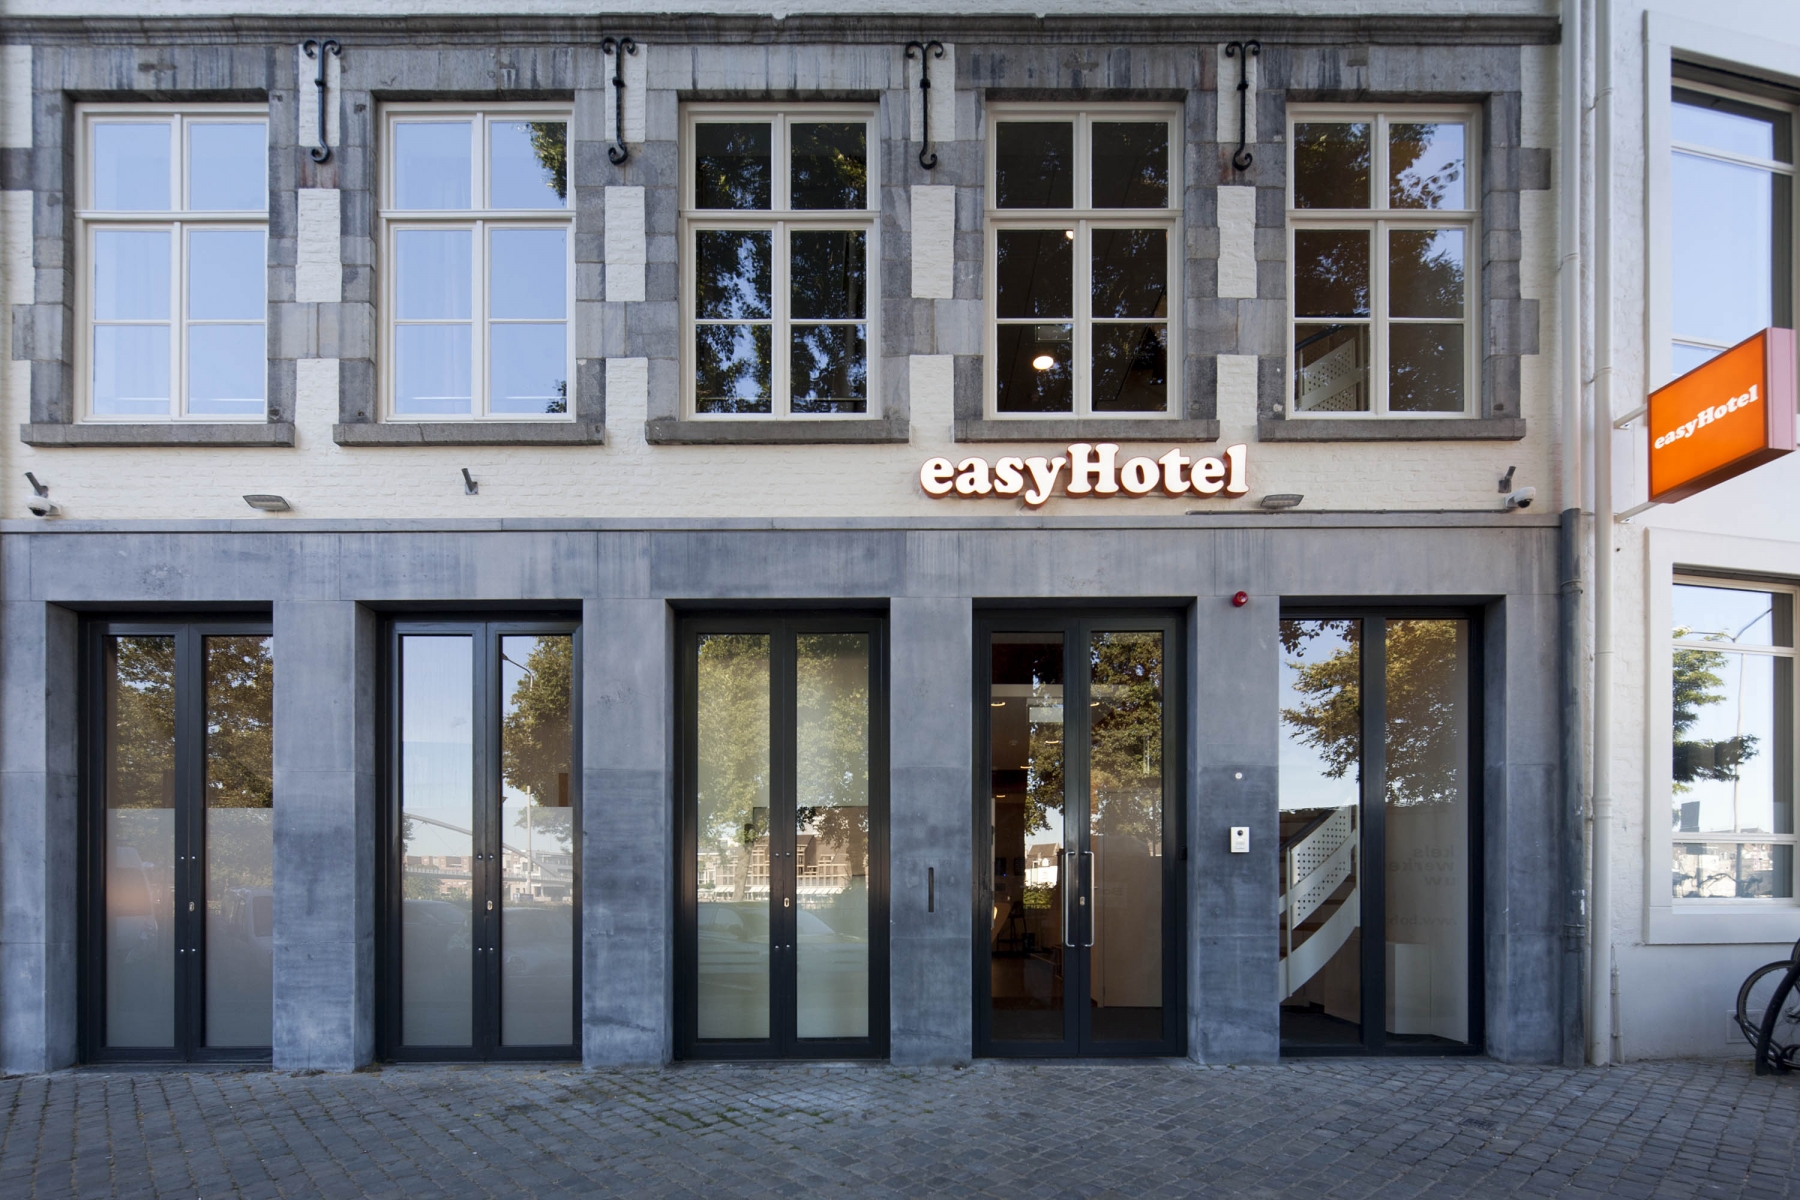 easyHotel Maastricht City Centre <br/>46.00 ew <br/> <a href='http://vakantieoplossing.nl/outpage/?id=f737defdb1ec207e1ef69fe8379f83bb' target='_blank'>View Details</a>